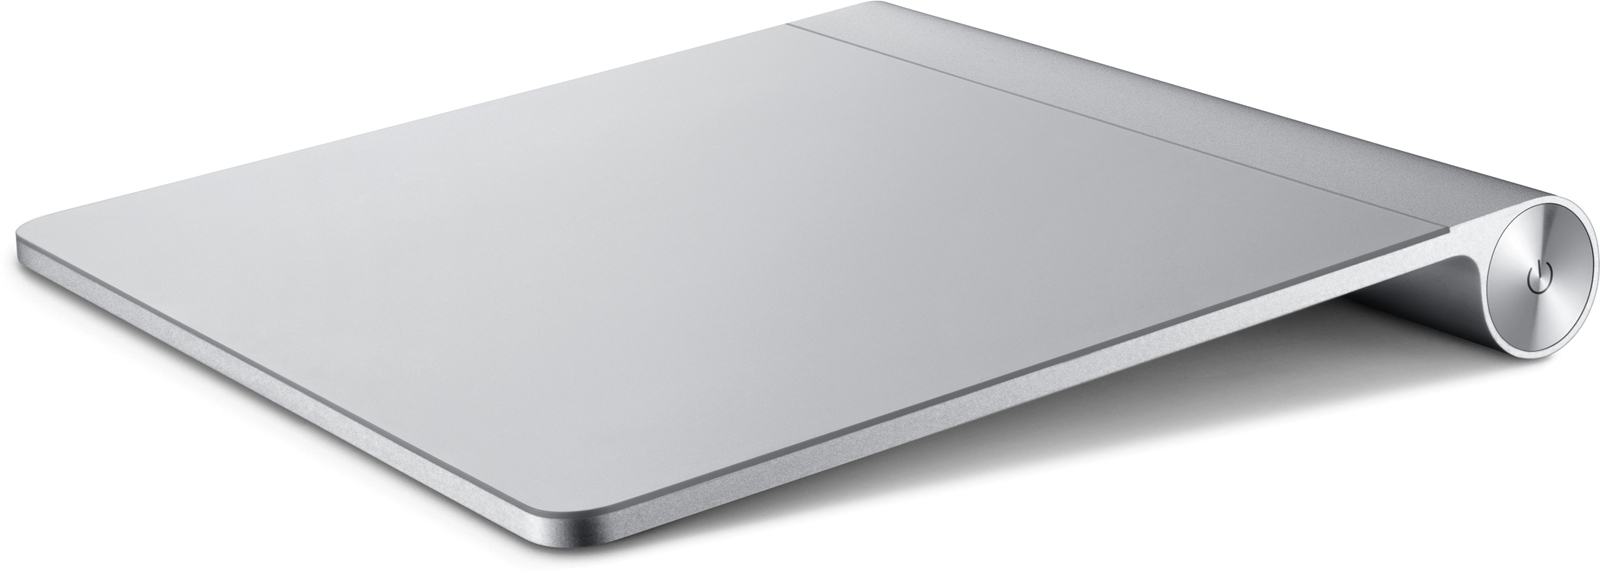 Magic Trackpad is now available on the Apple Online Store; MacBooks Pro come with a gift box